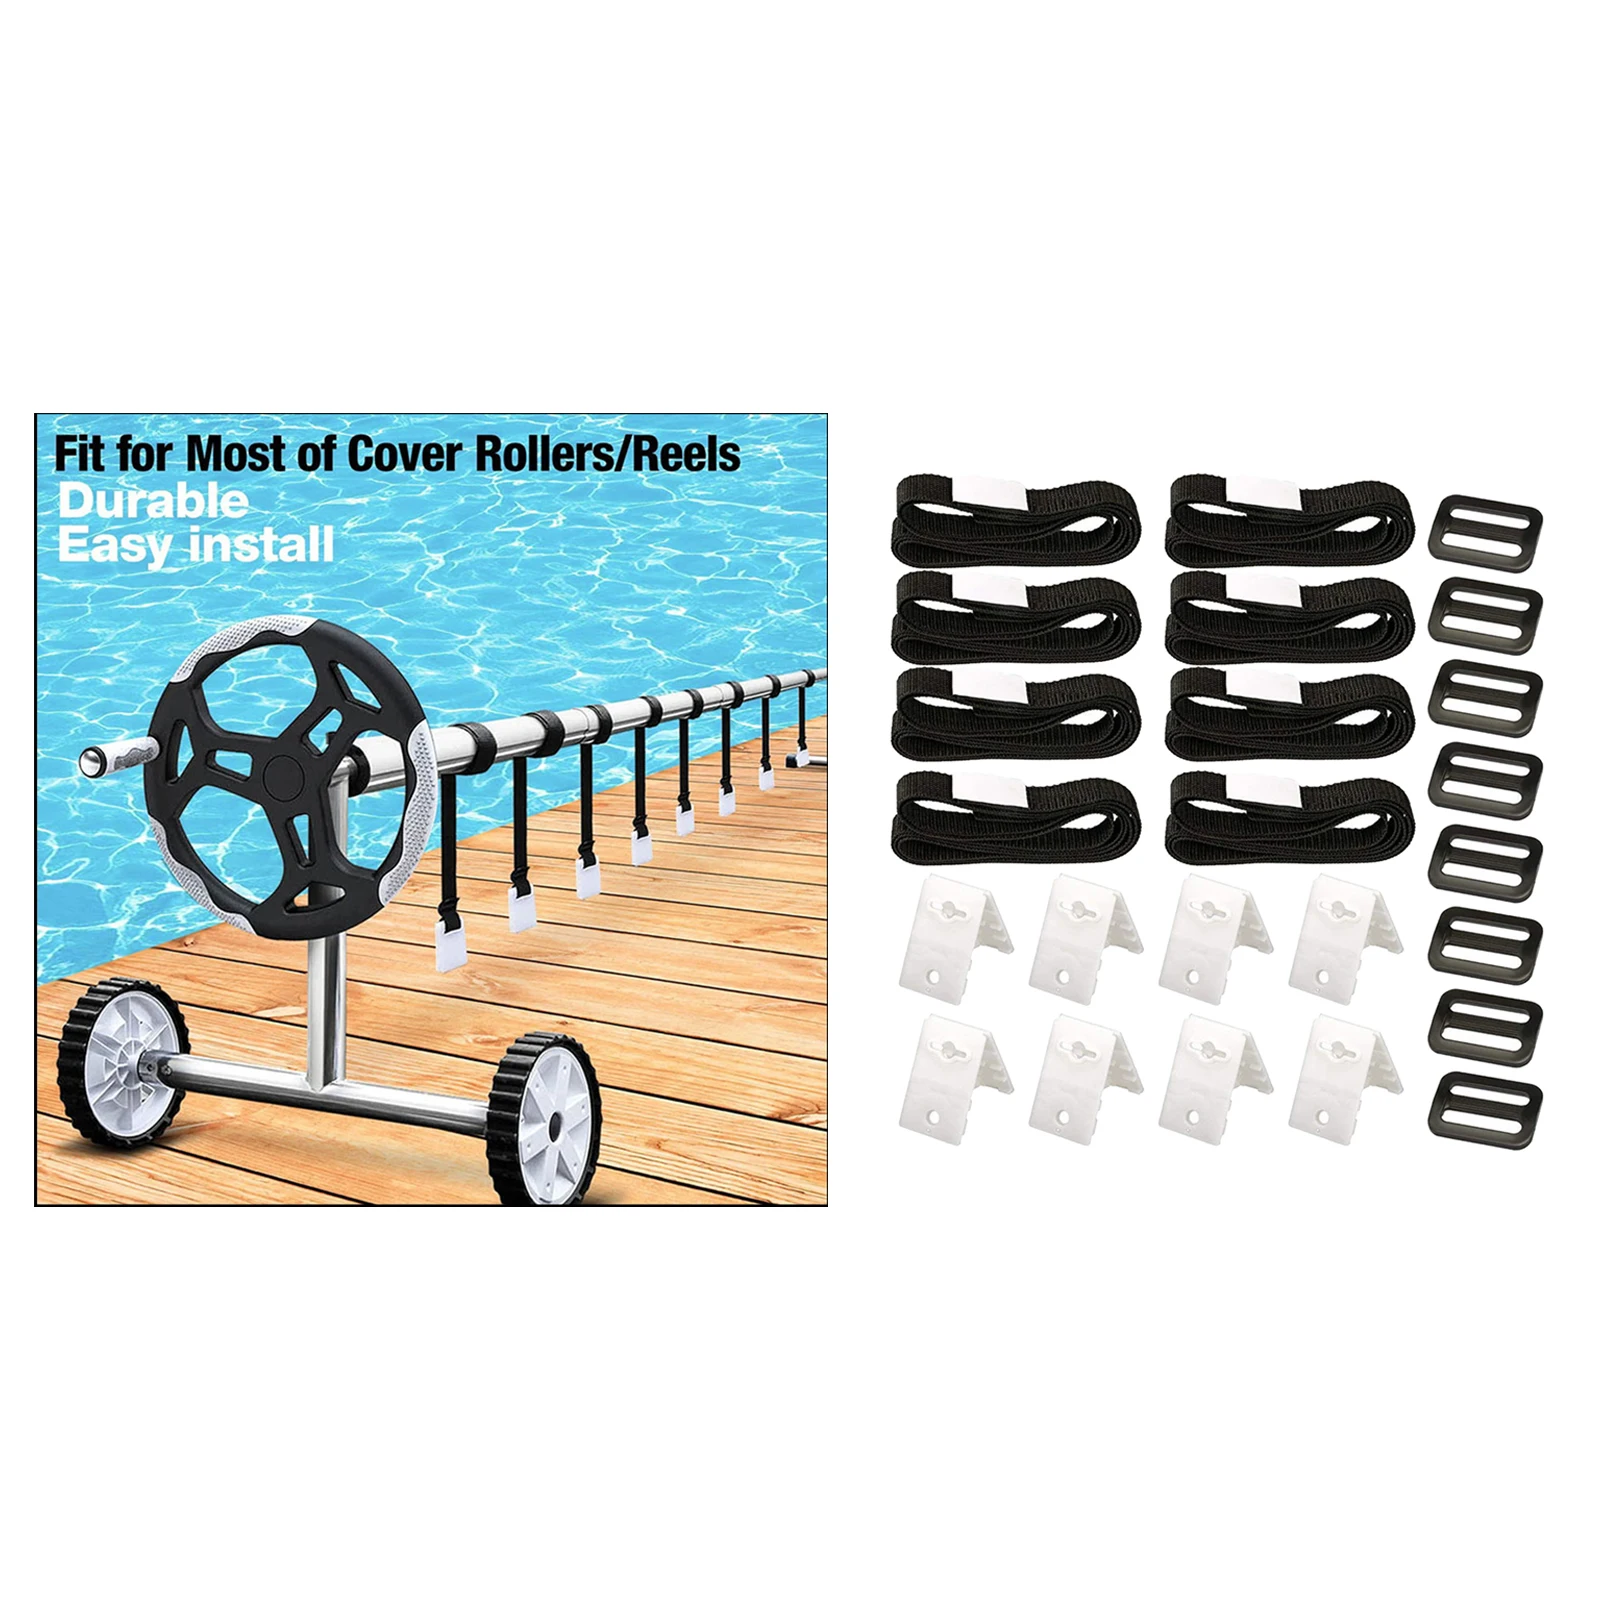 24PCS Complete Pool Solar Cover Reel Attachment Straps Kit for Swimming Pool